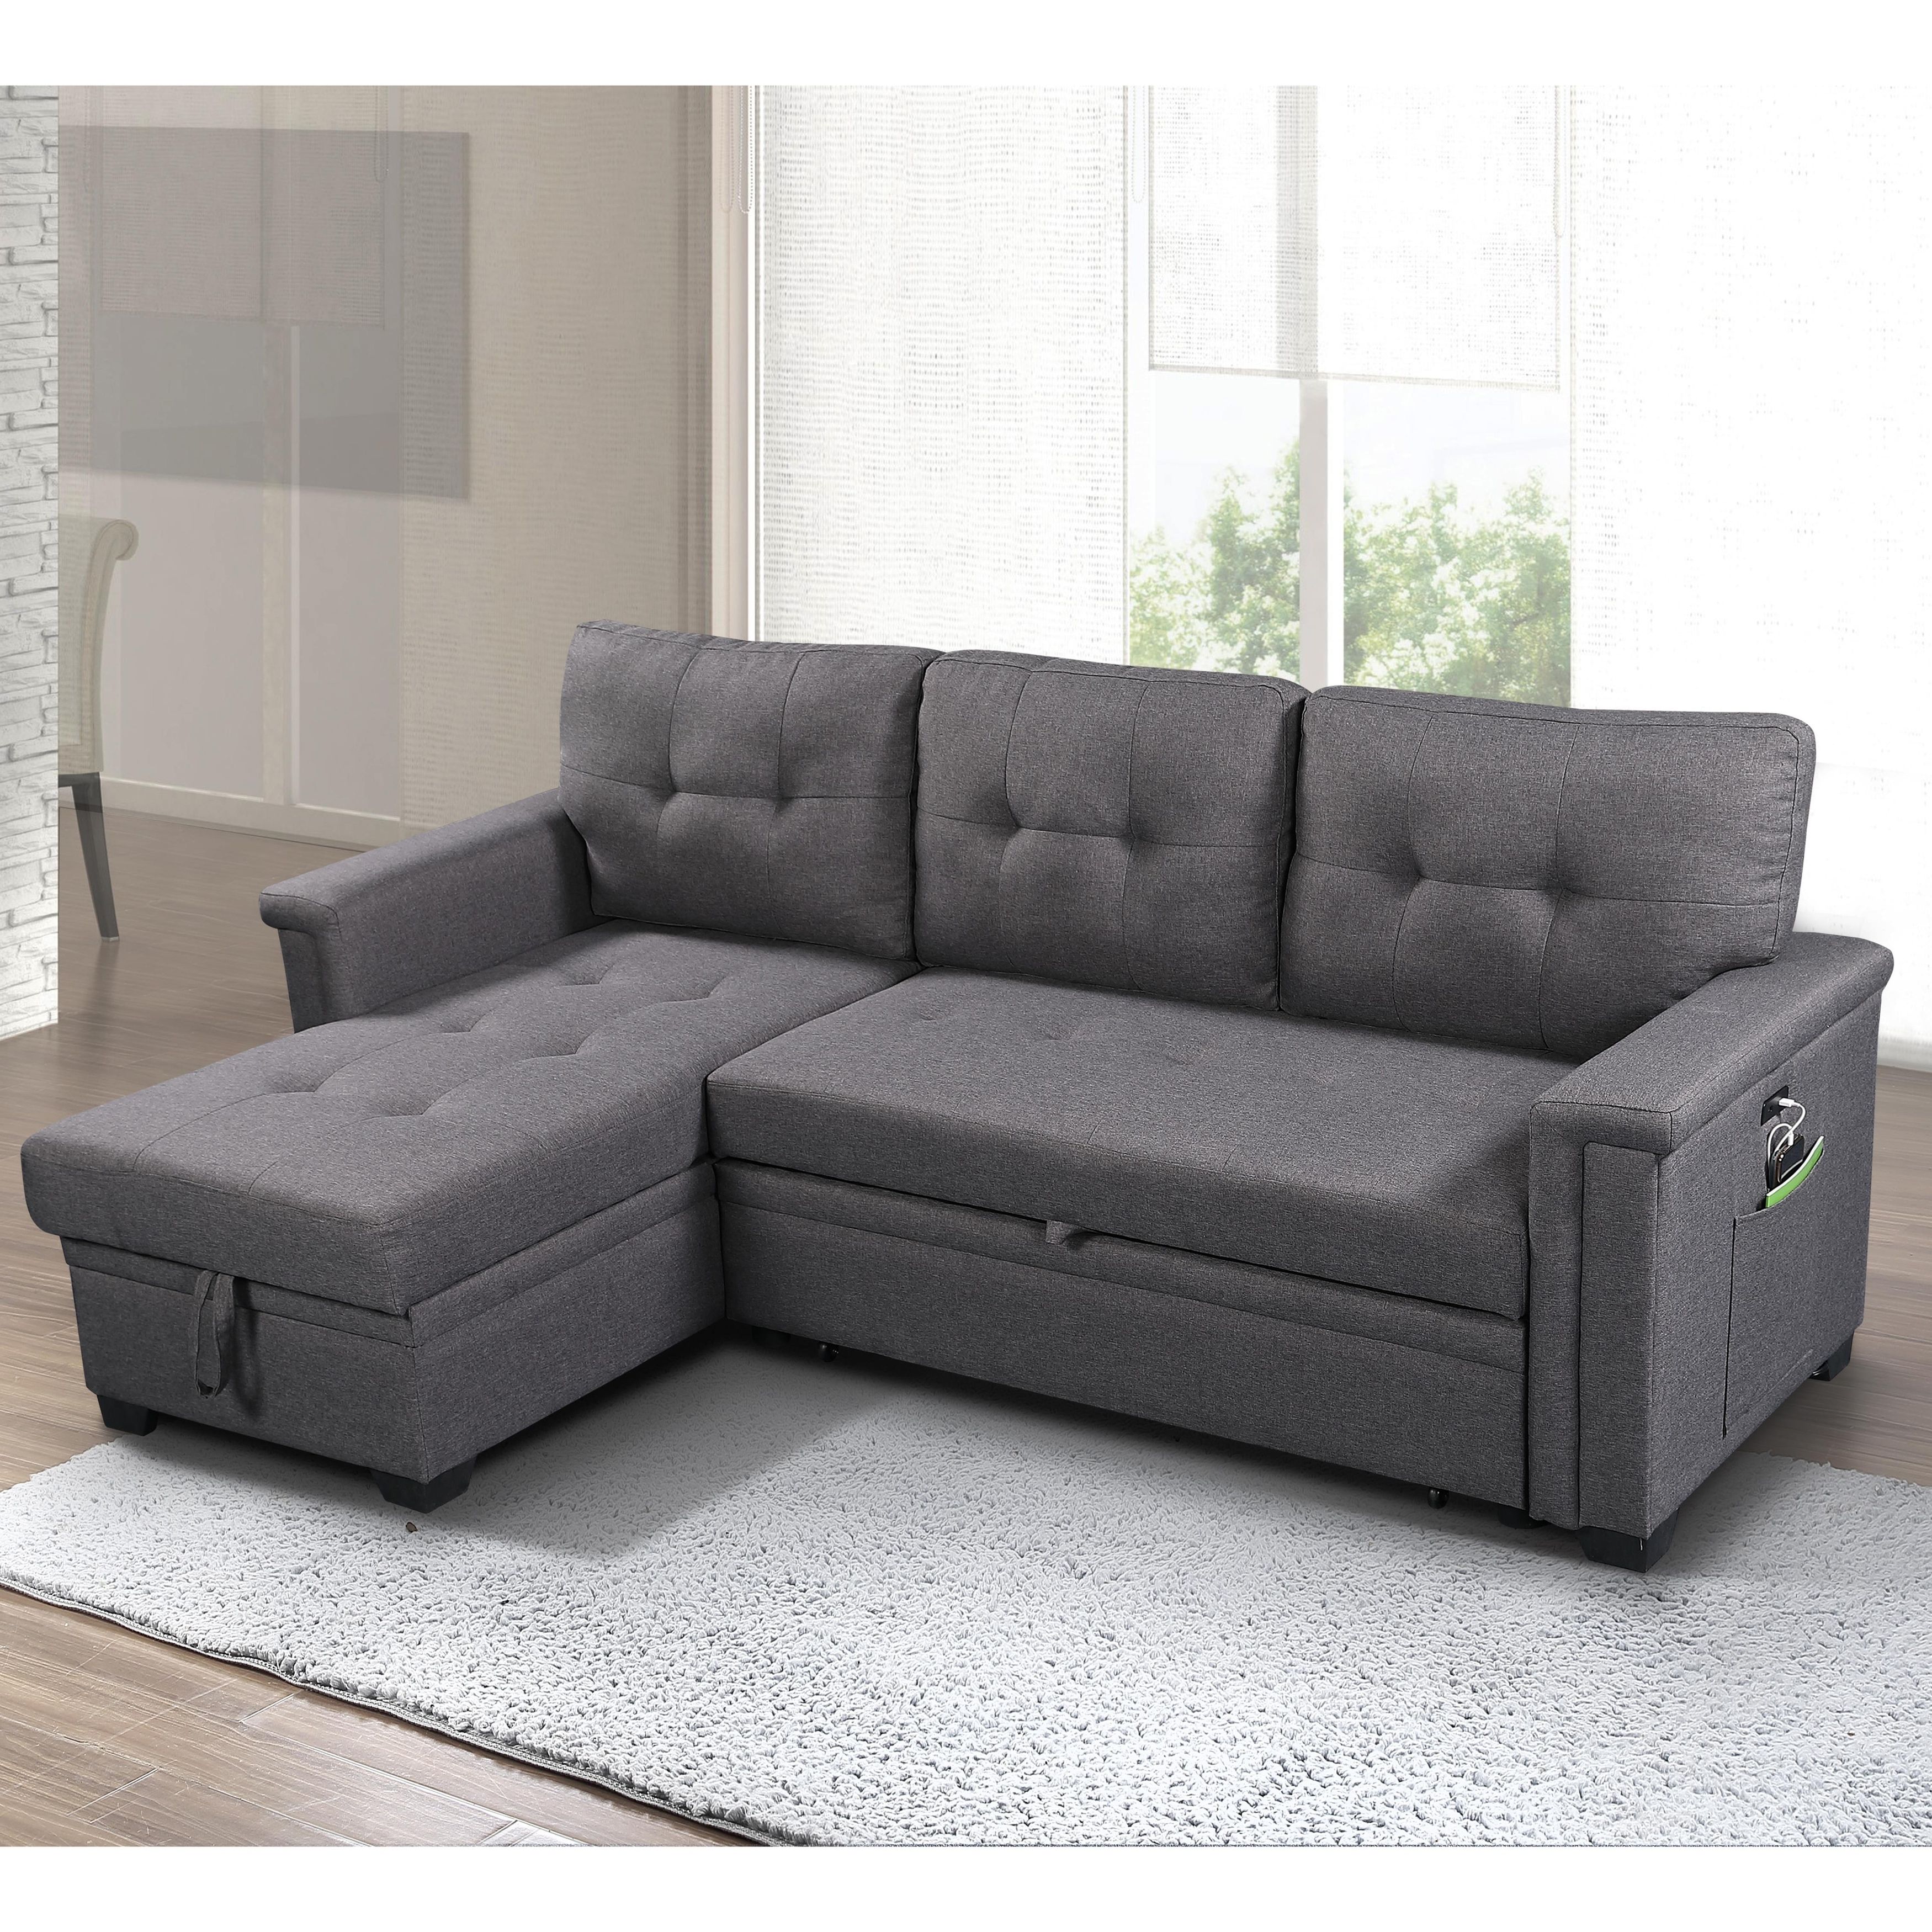 Ashlyn Reversible Sleeper Sofa With Storage Chaise – On Sale – – 30144937 With Regard To Convertible Sofa With Matching Chaise (View 5 of 20)